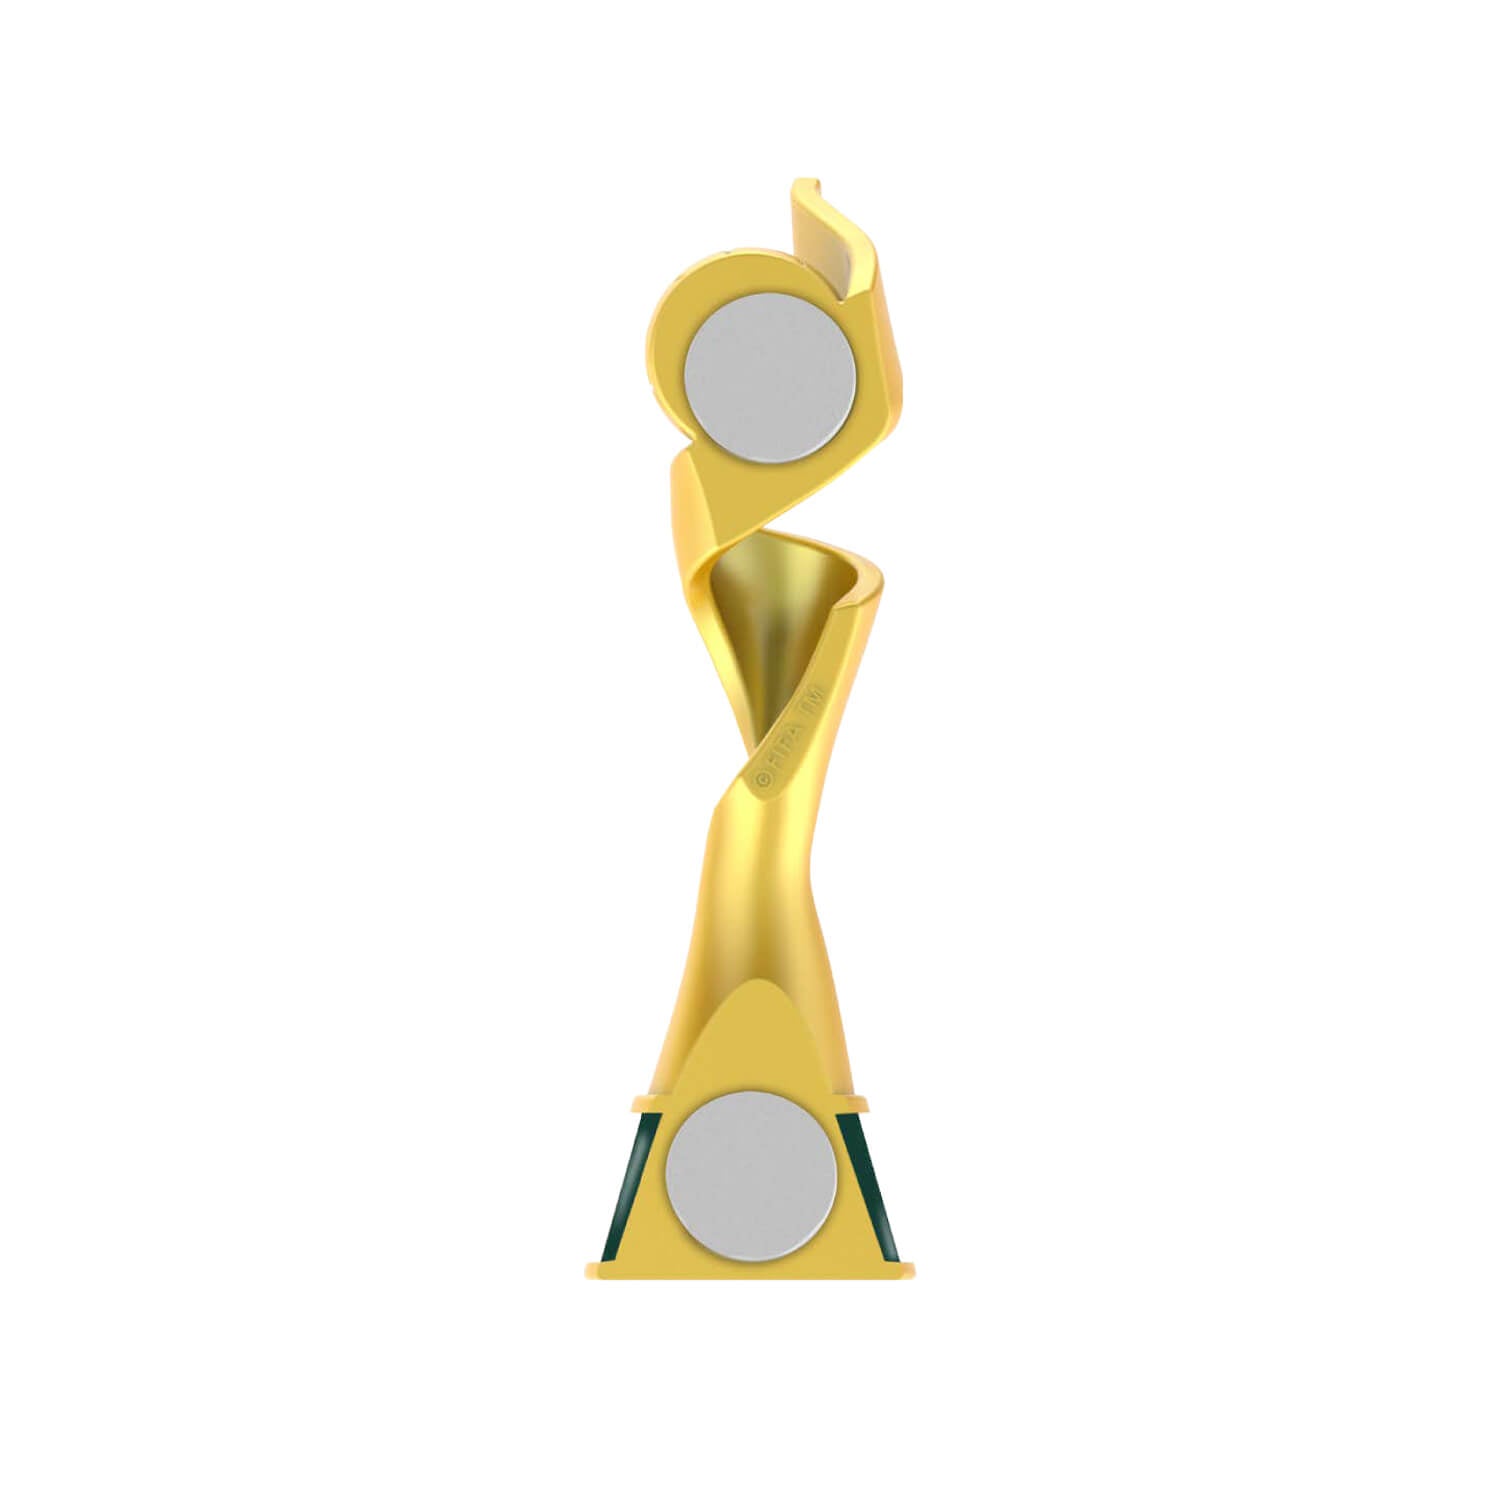 FIFA Women's World Cup Australia 2023 Replica Trophy Magnet: Show Your Support with this Authentic Souvenir Magnet!